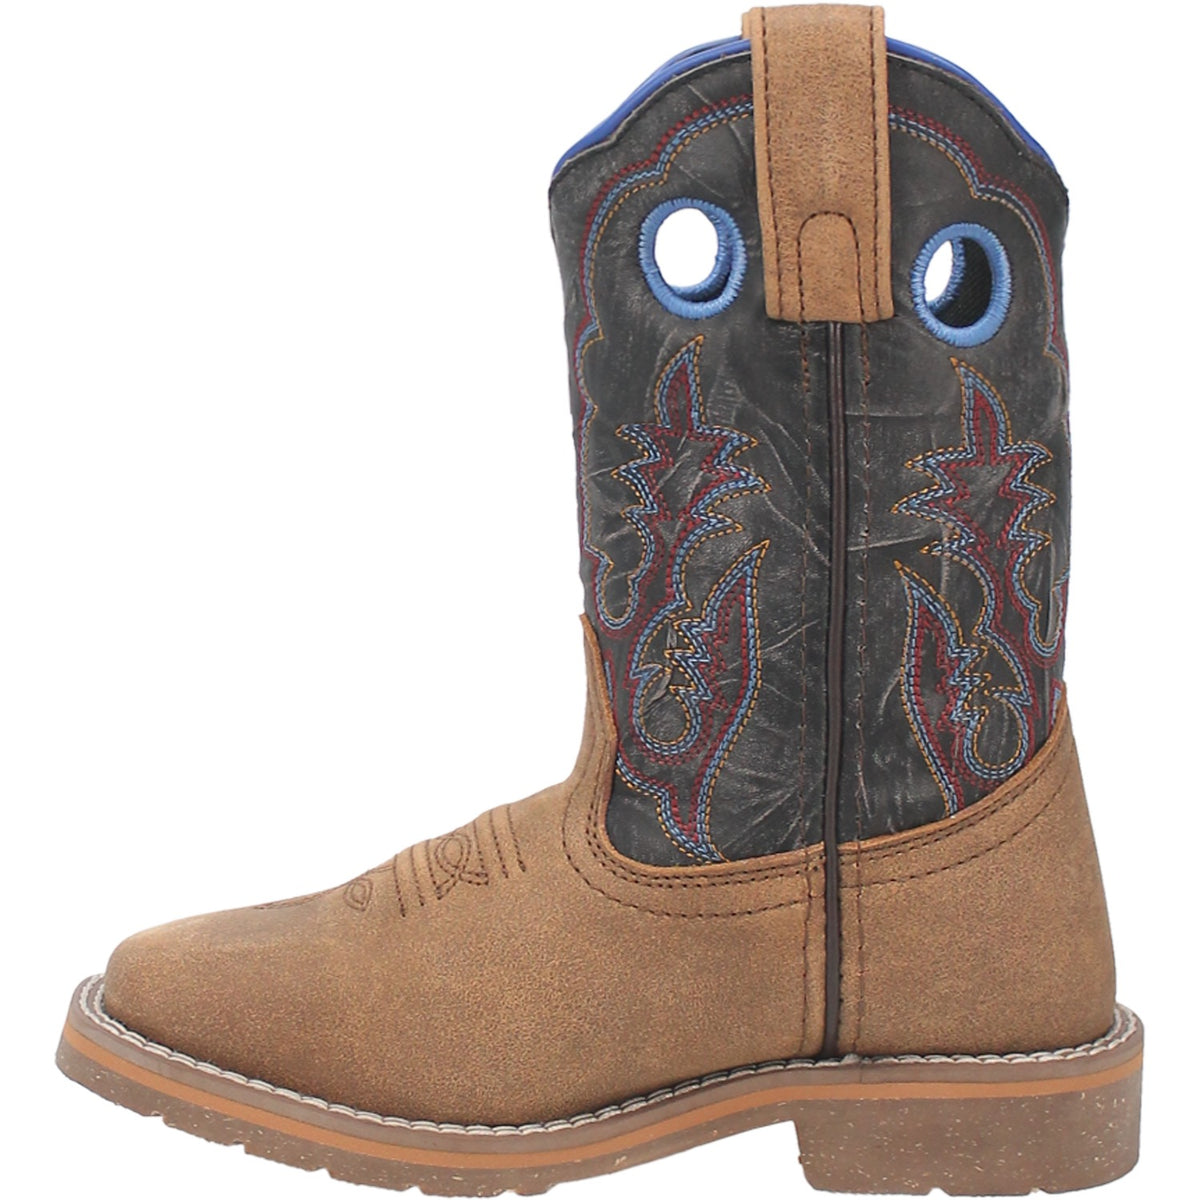 RYE LEATHER CHILDREN'S BOOT Cover